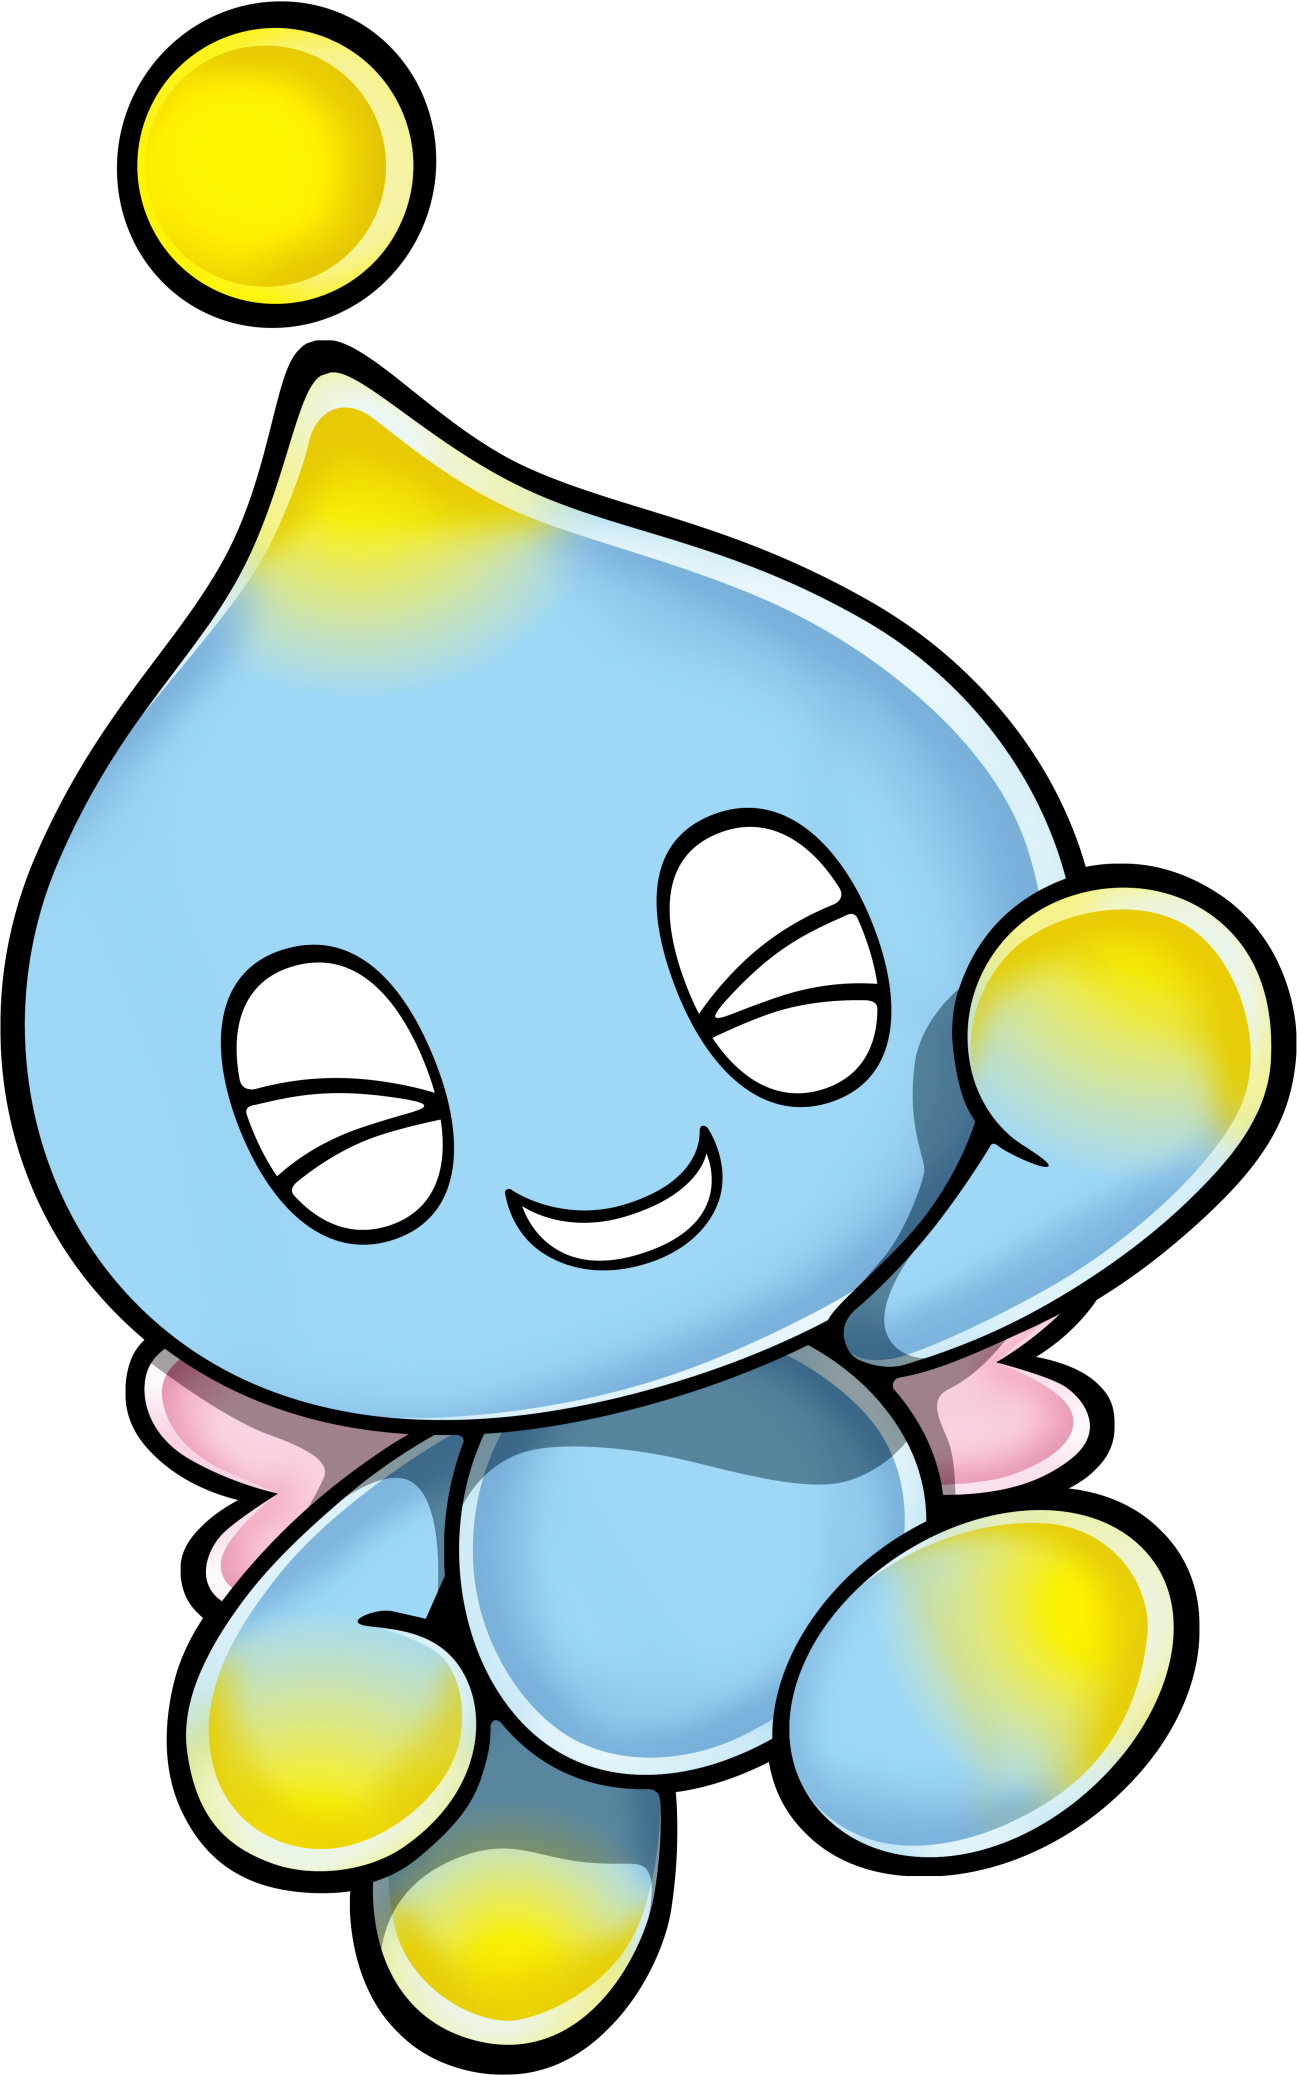 neutral-chao-2.png